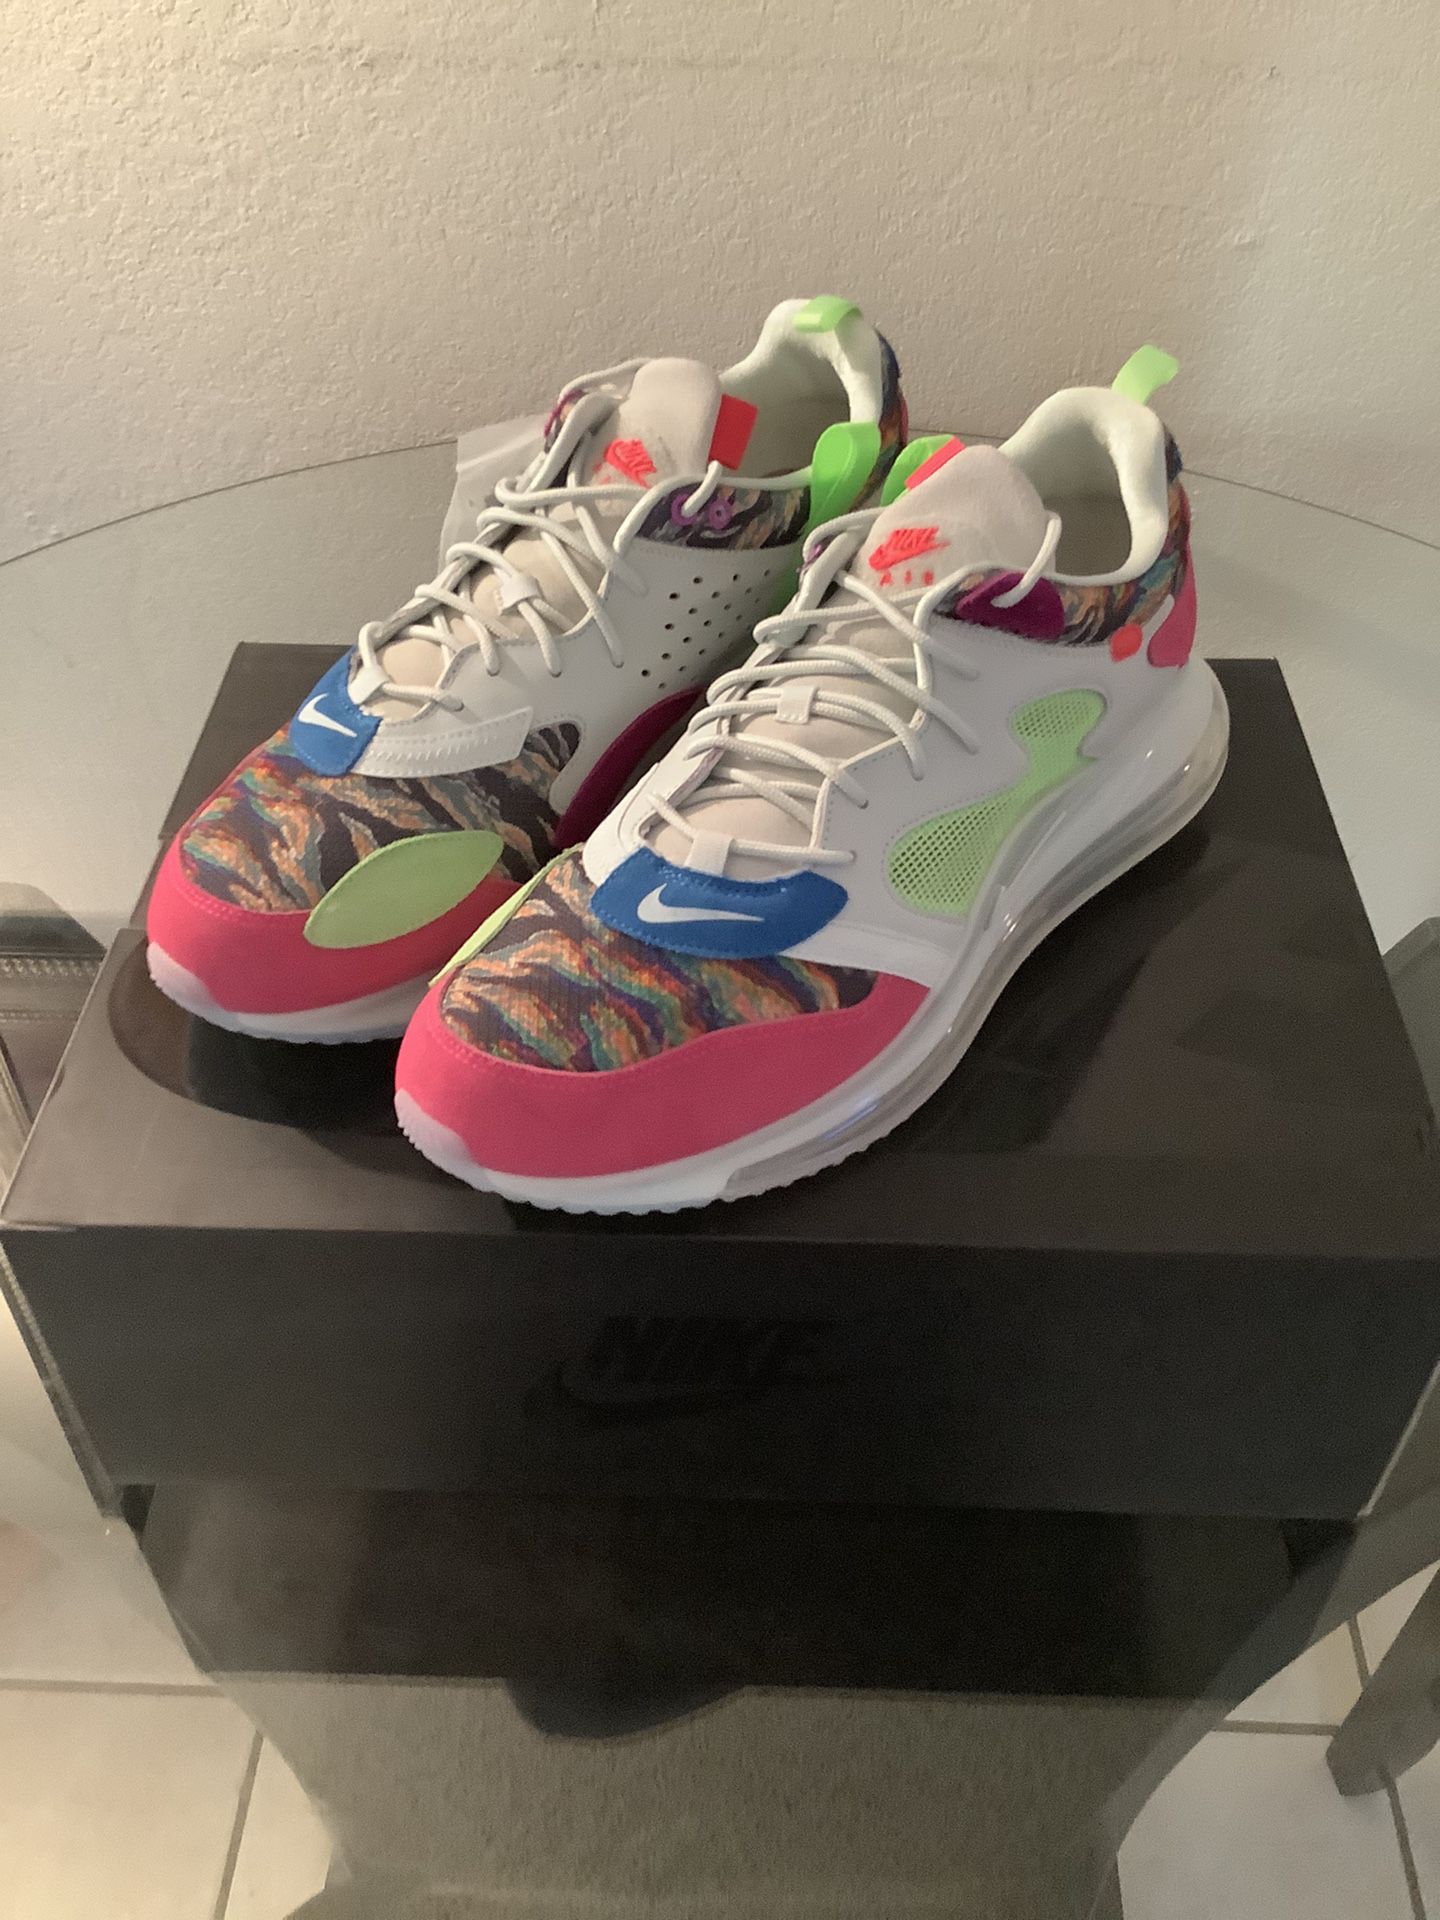 Nike Air Max 720 ”OBJ King of the Drip” (Size 15)